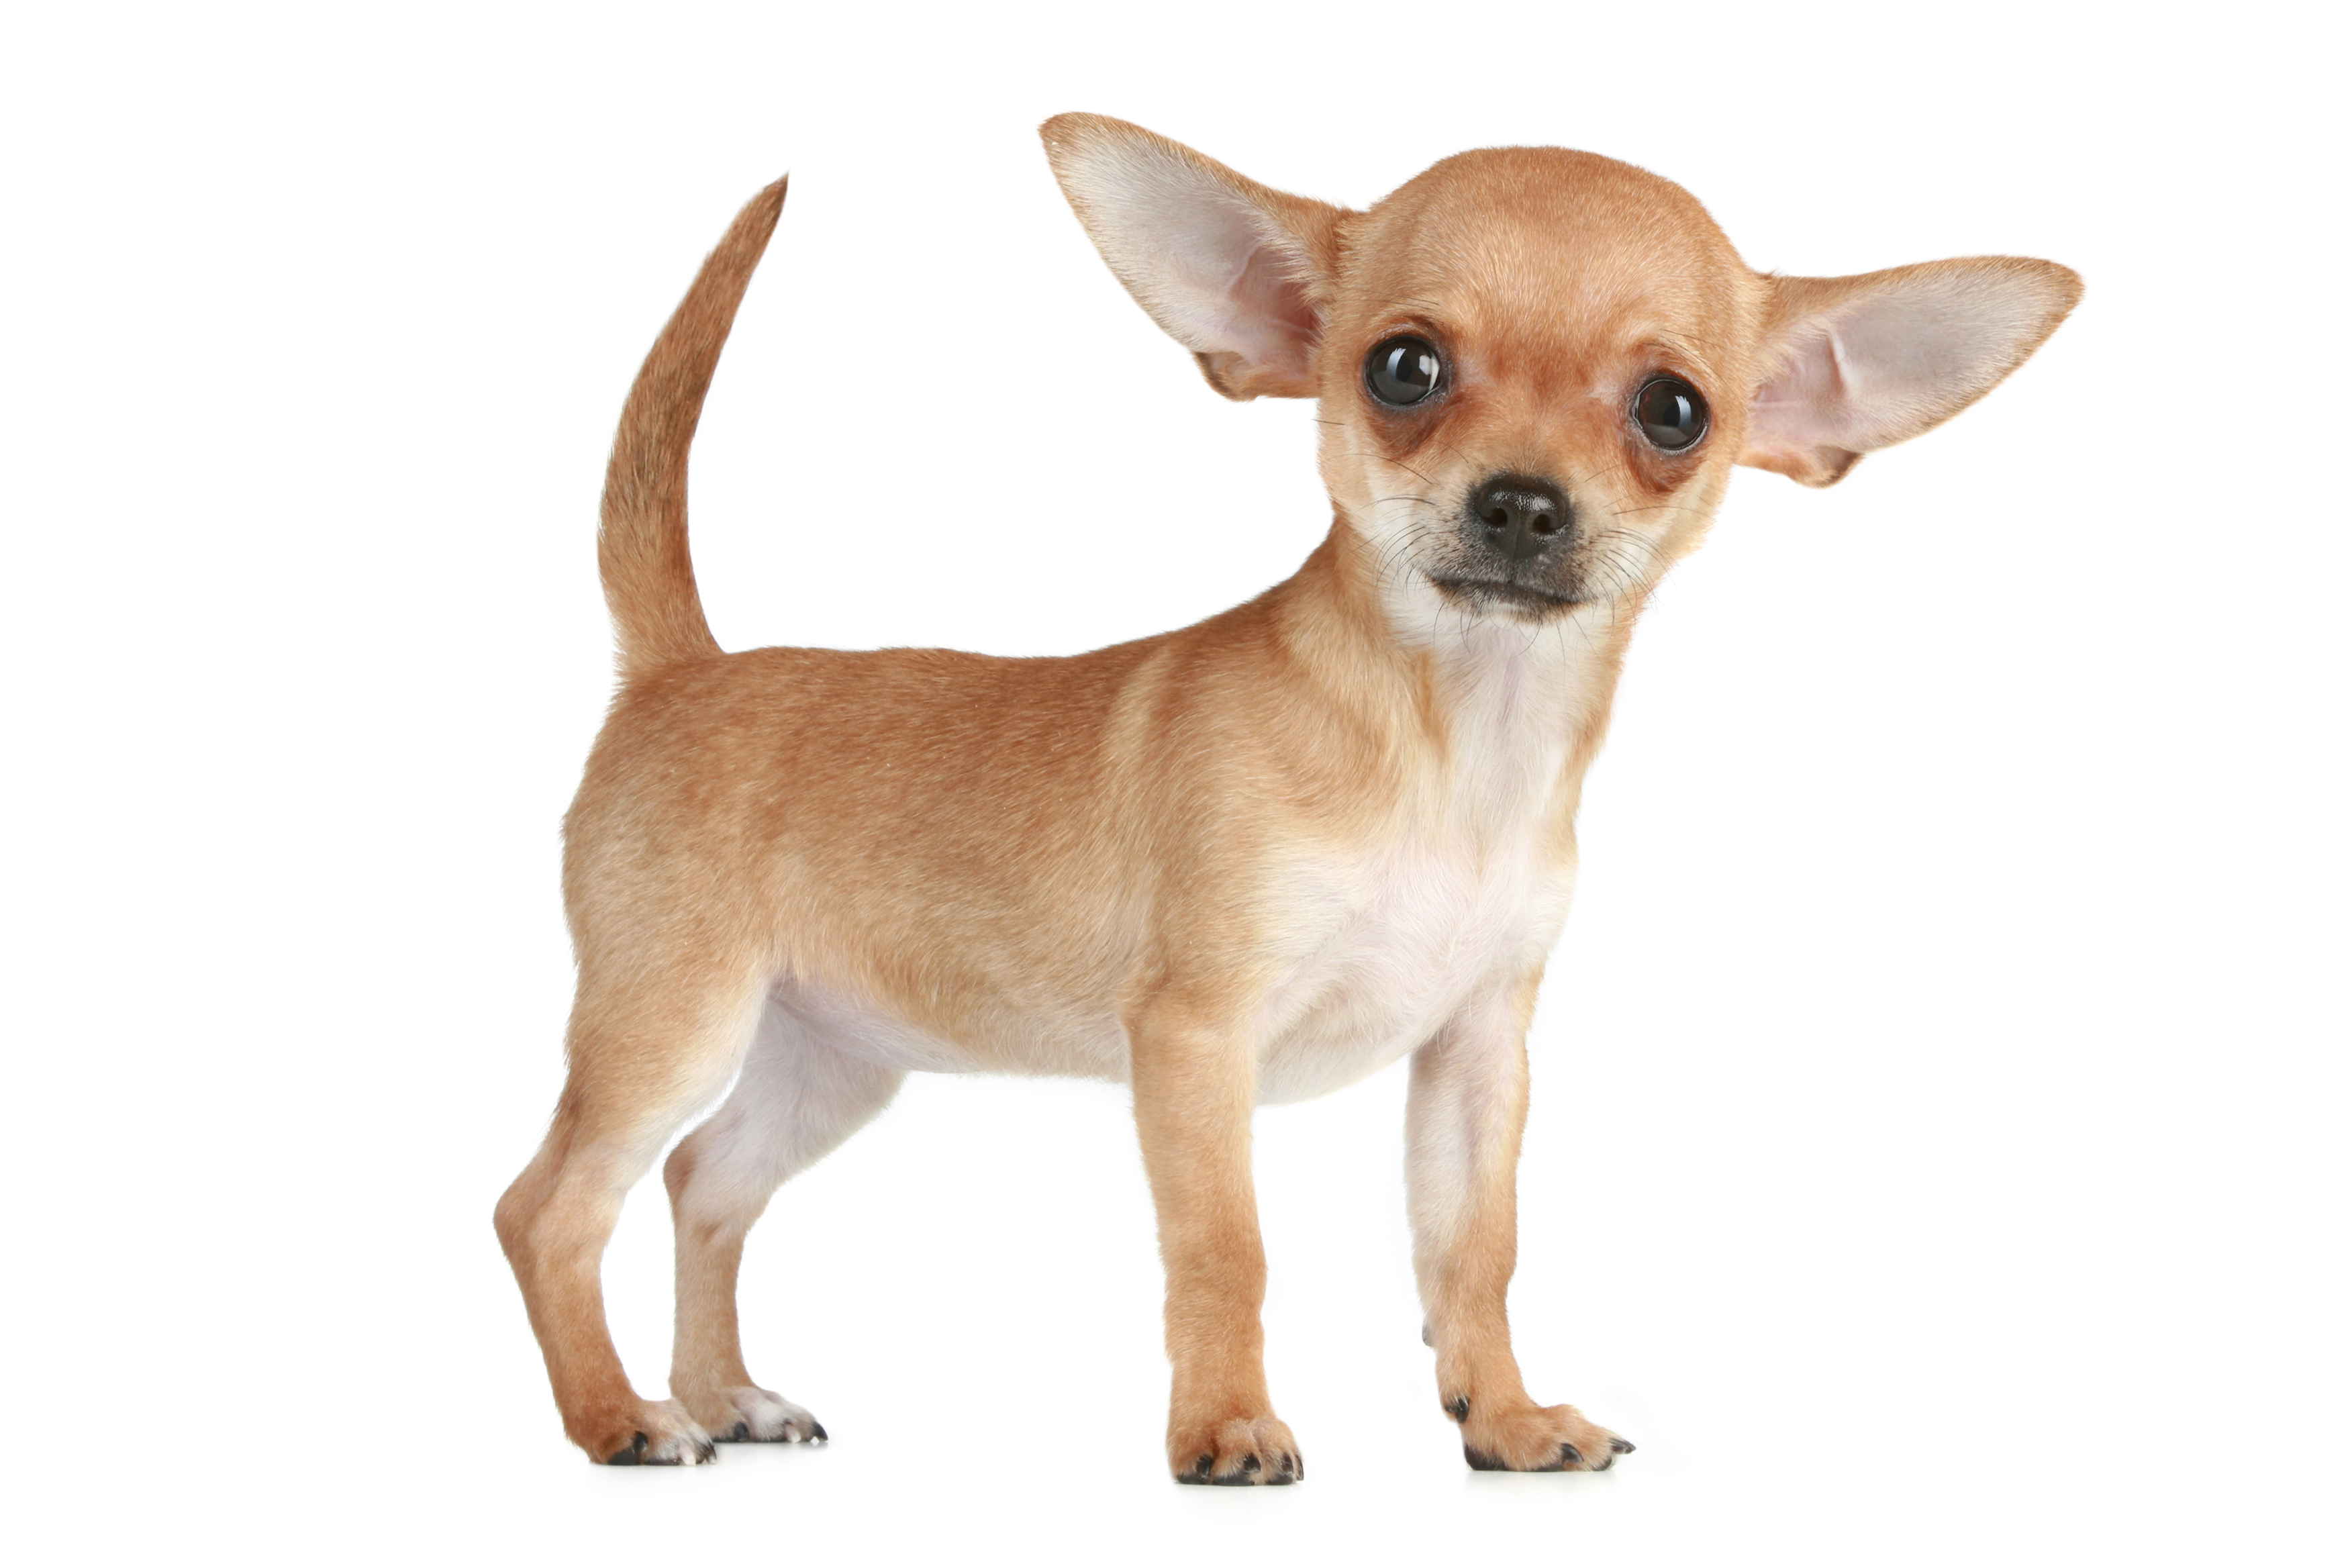 All The Better Hear You With: Chihuahua Ear Health